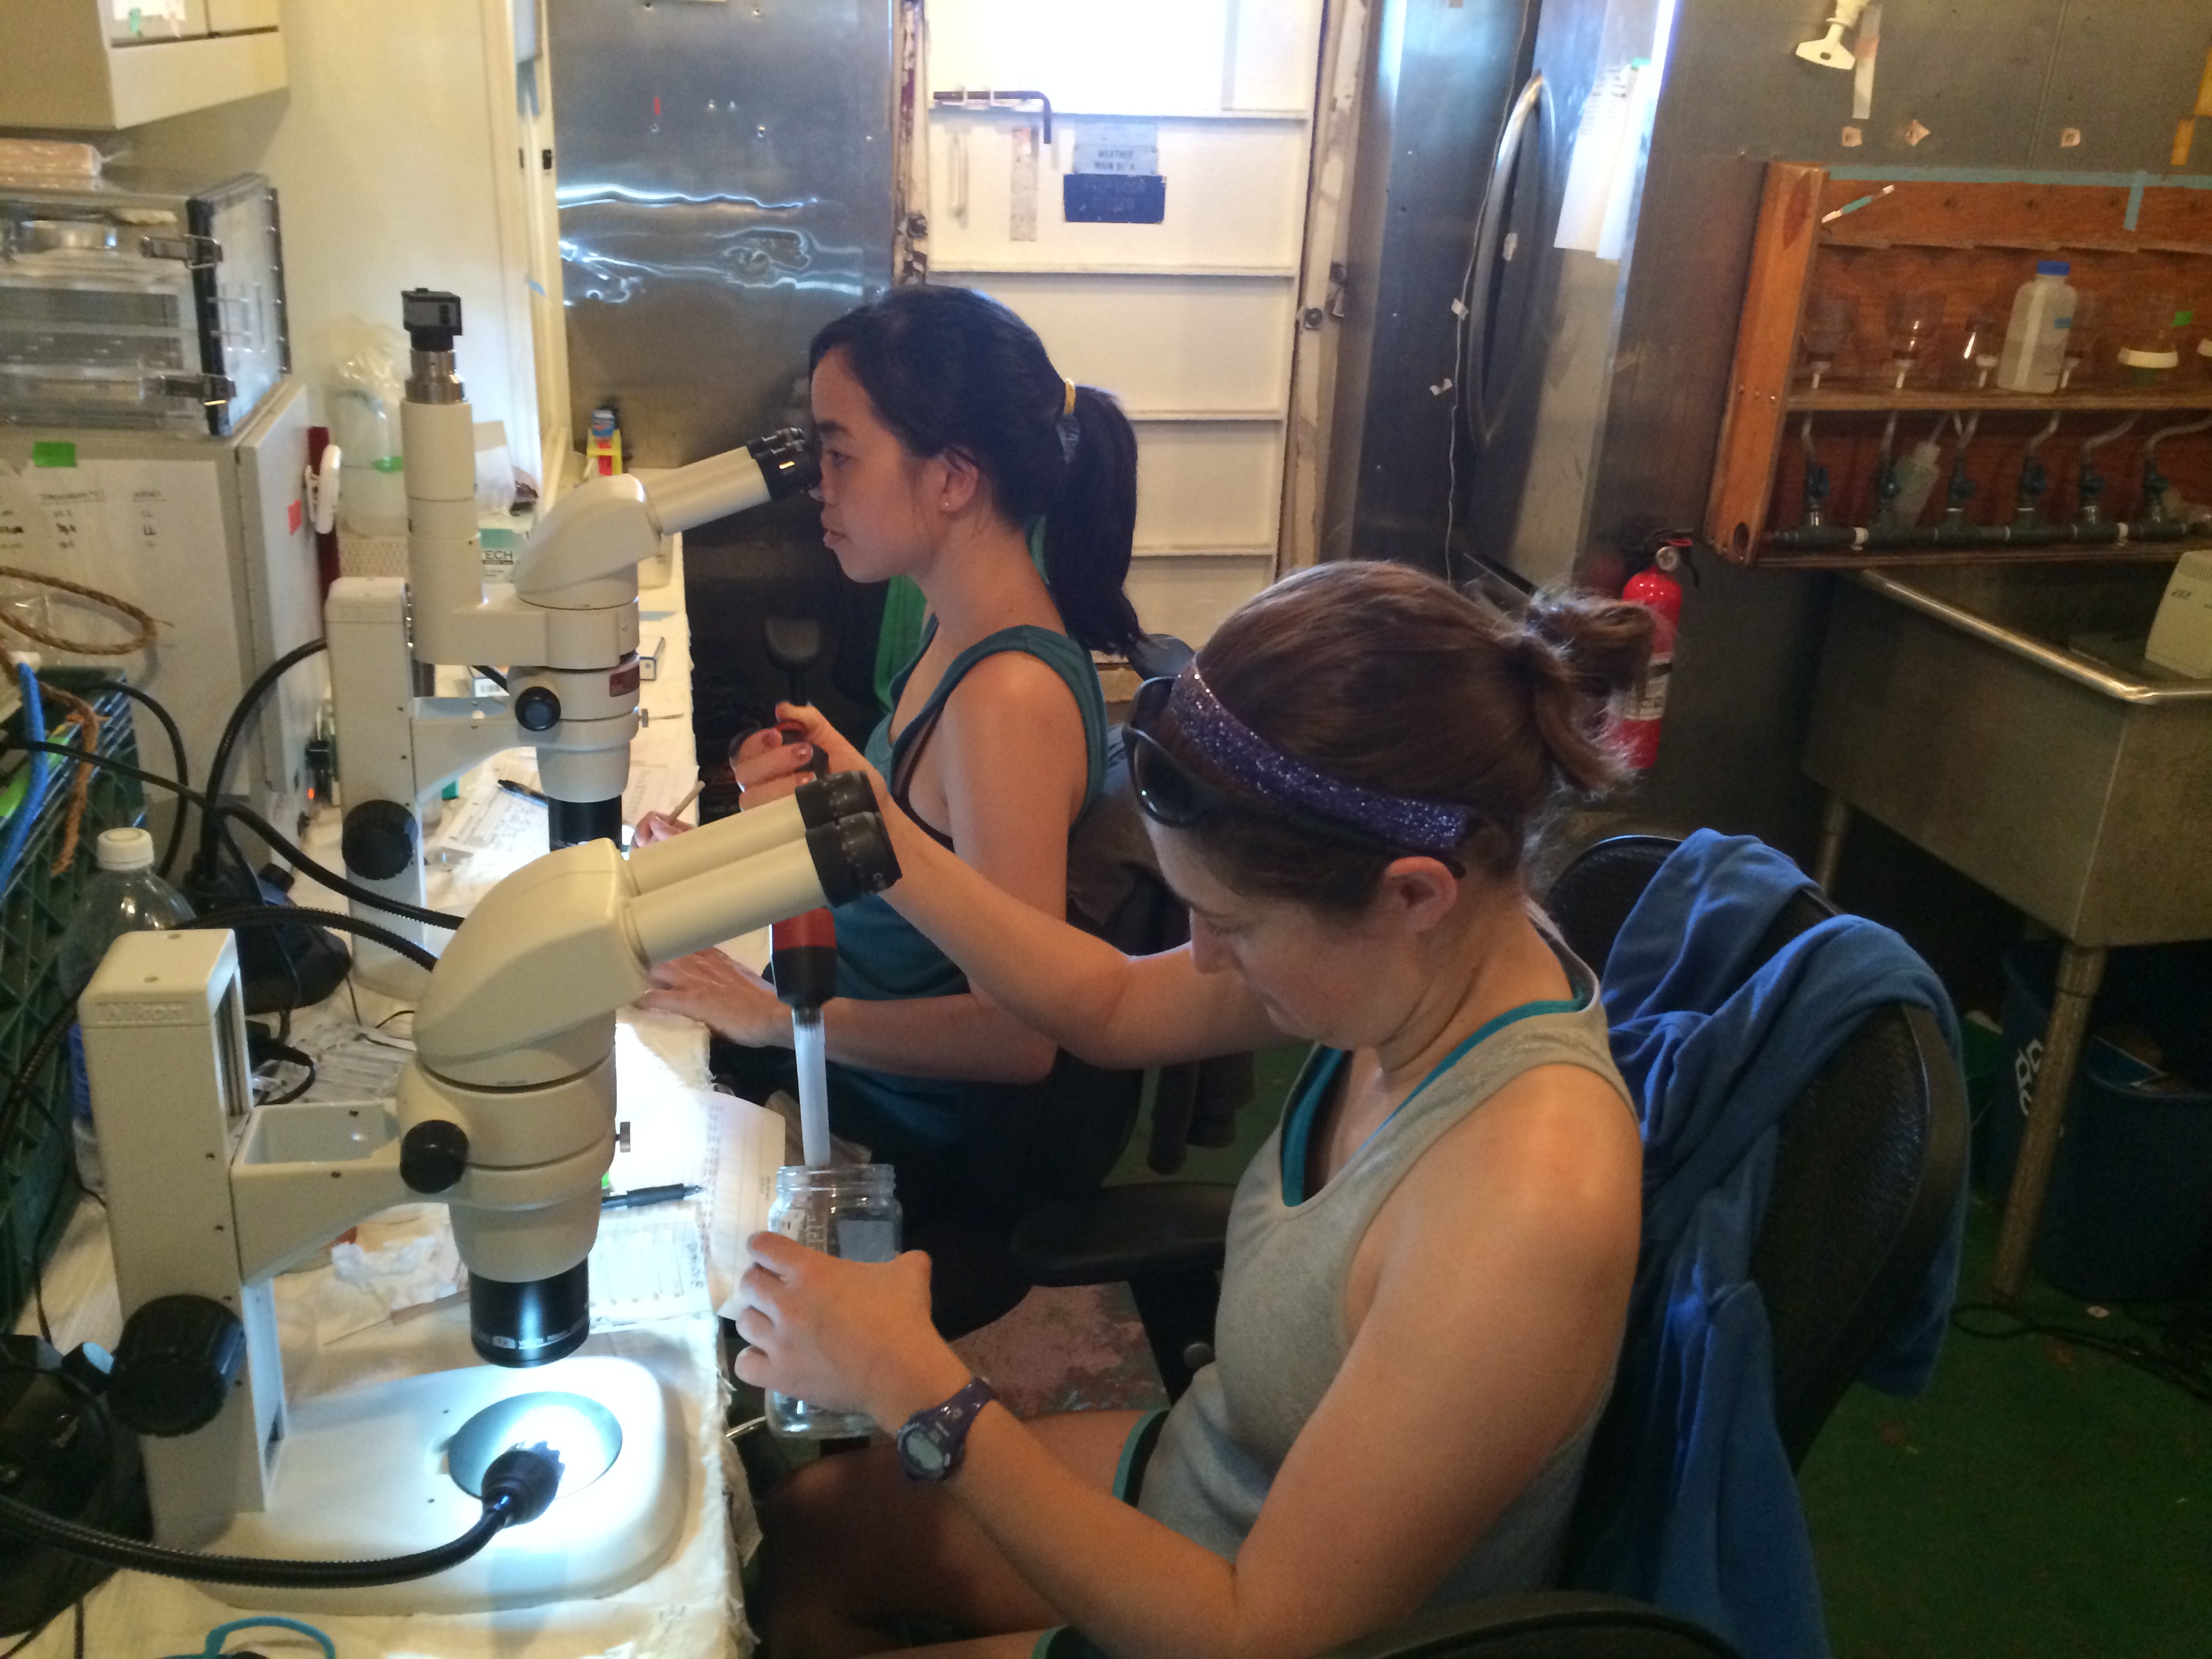 Counting zooplankton for ballast testing